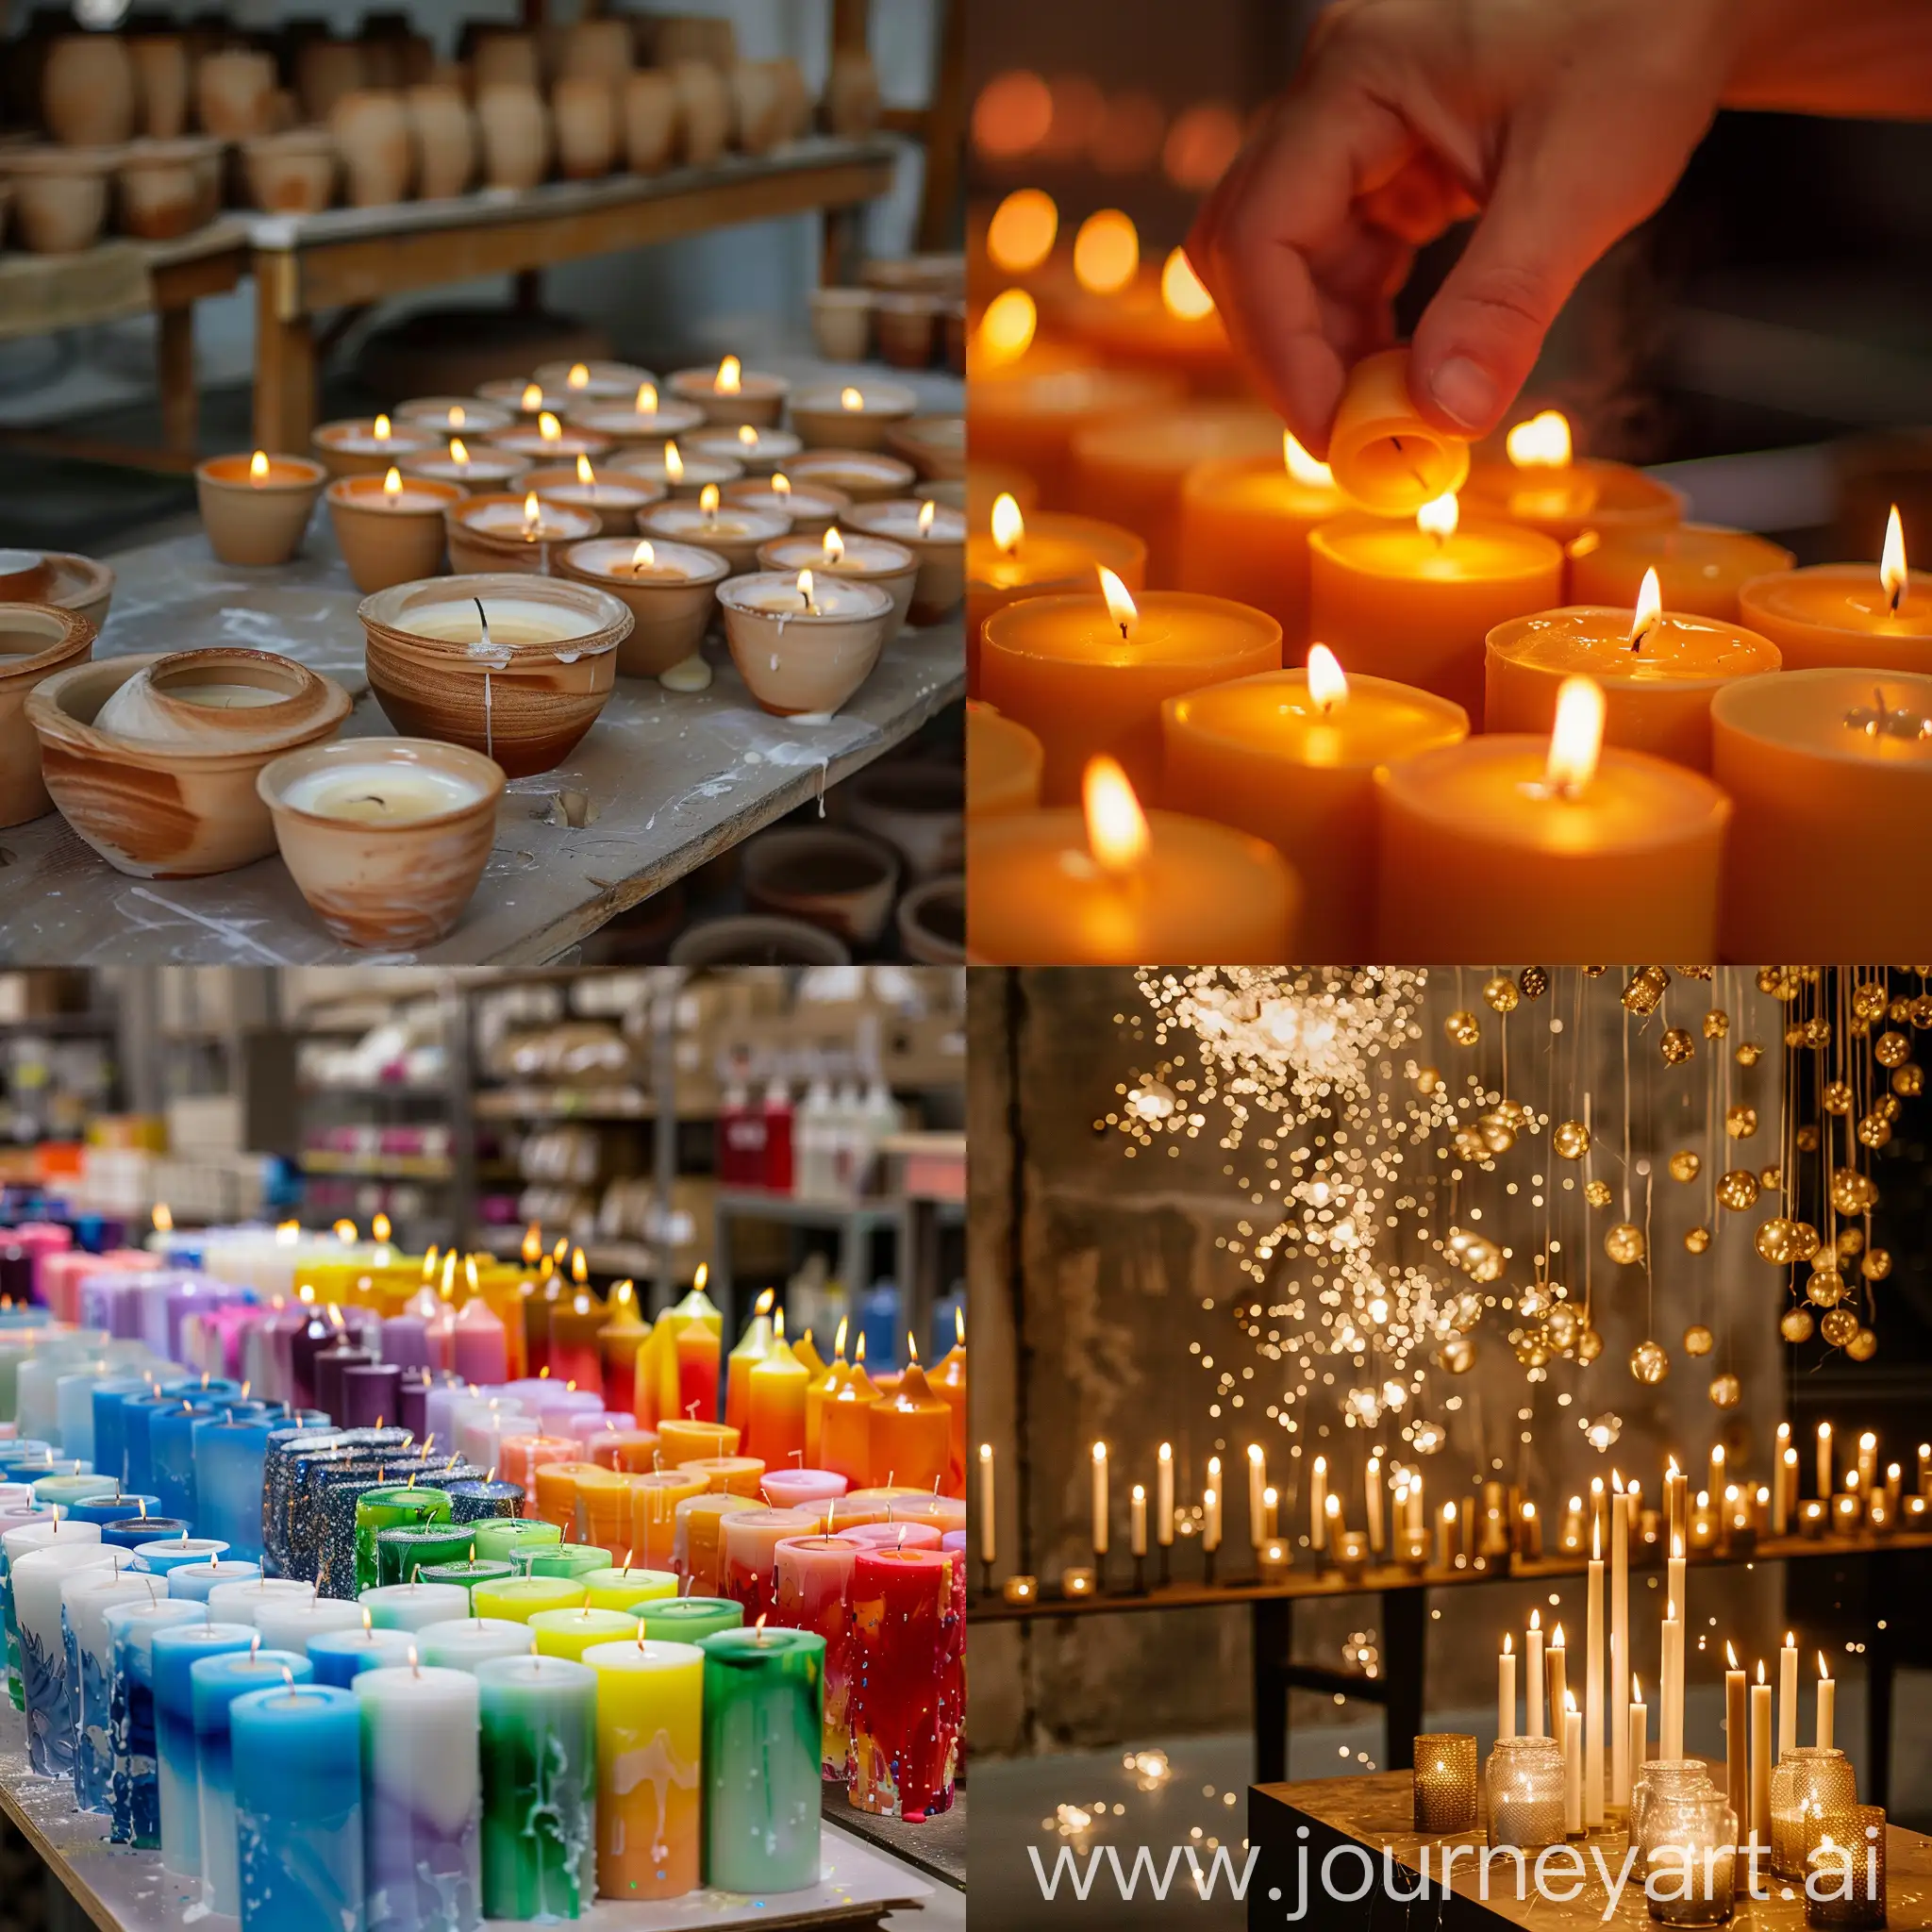 Studio-Opening-Celebration-with-Candles